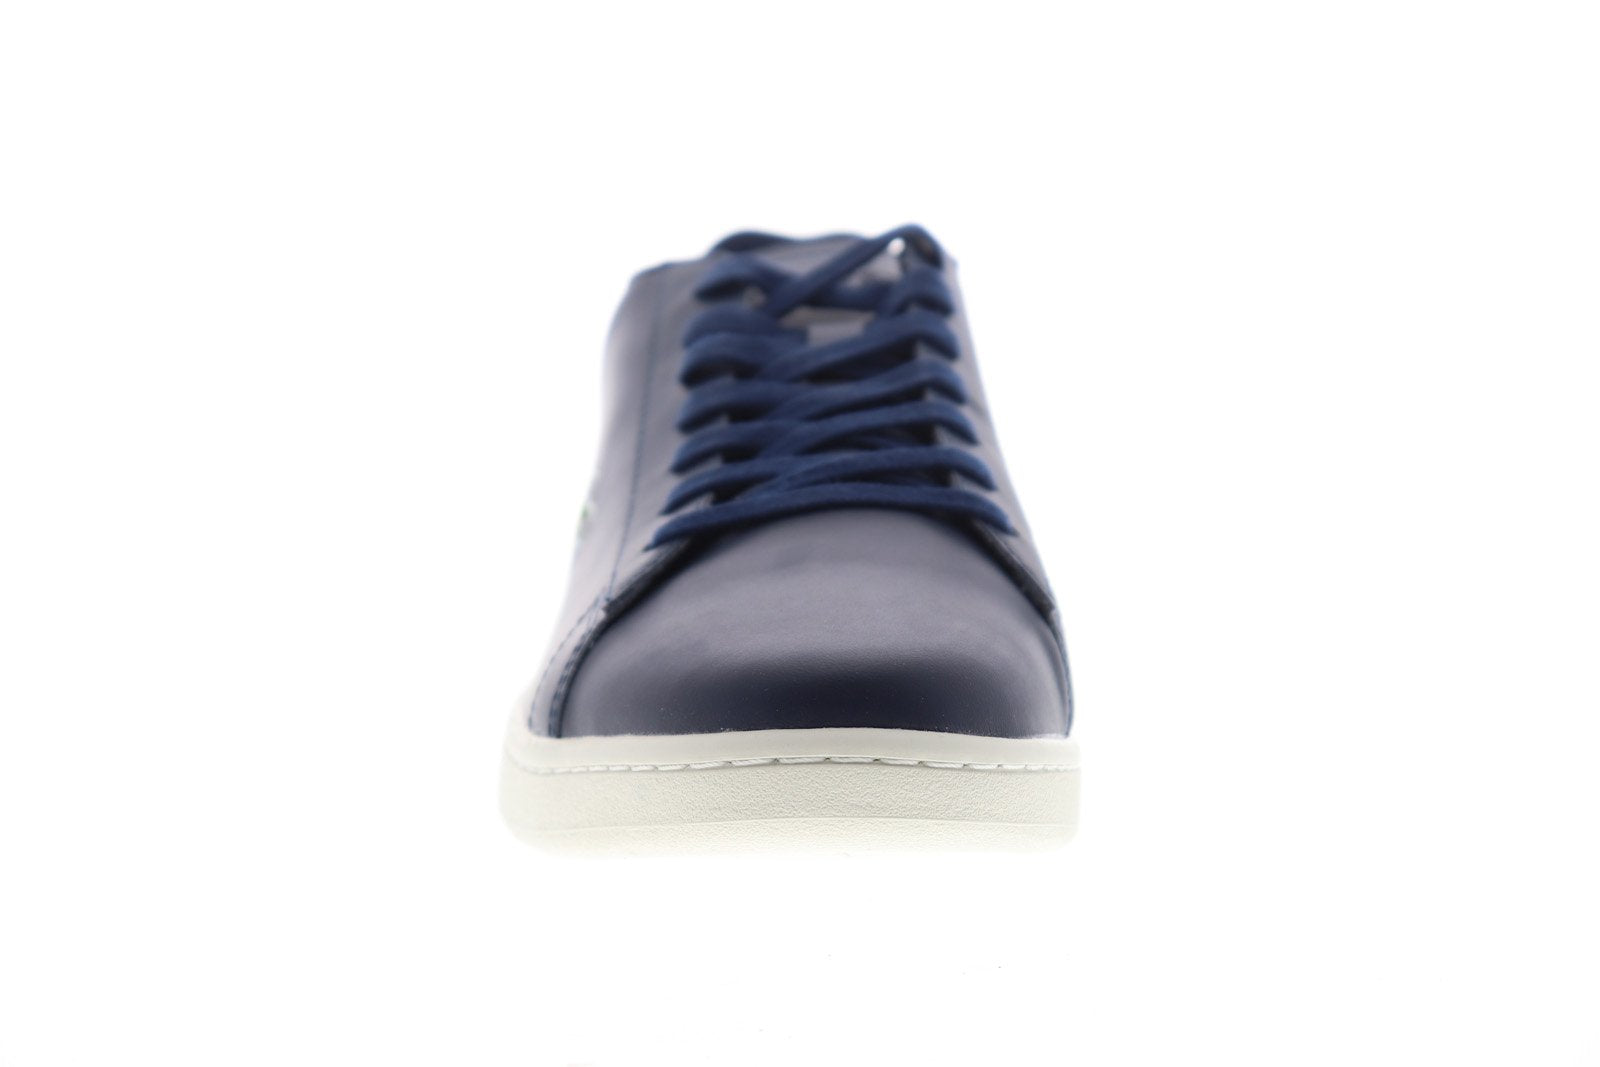 Lacoste Men's T-Clip Tricolor Leather and Suede Sneakers White/Navy/Re |  Sneakers, Daim, Cuir